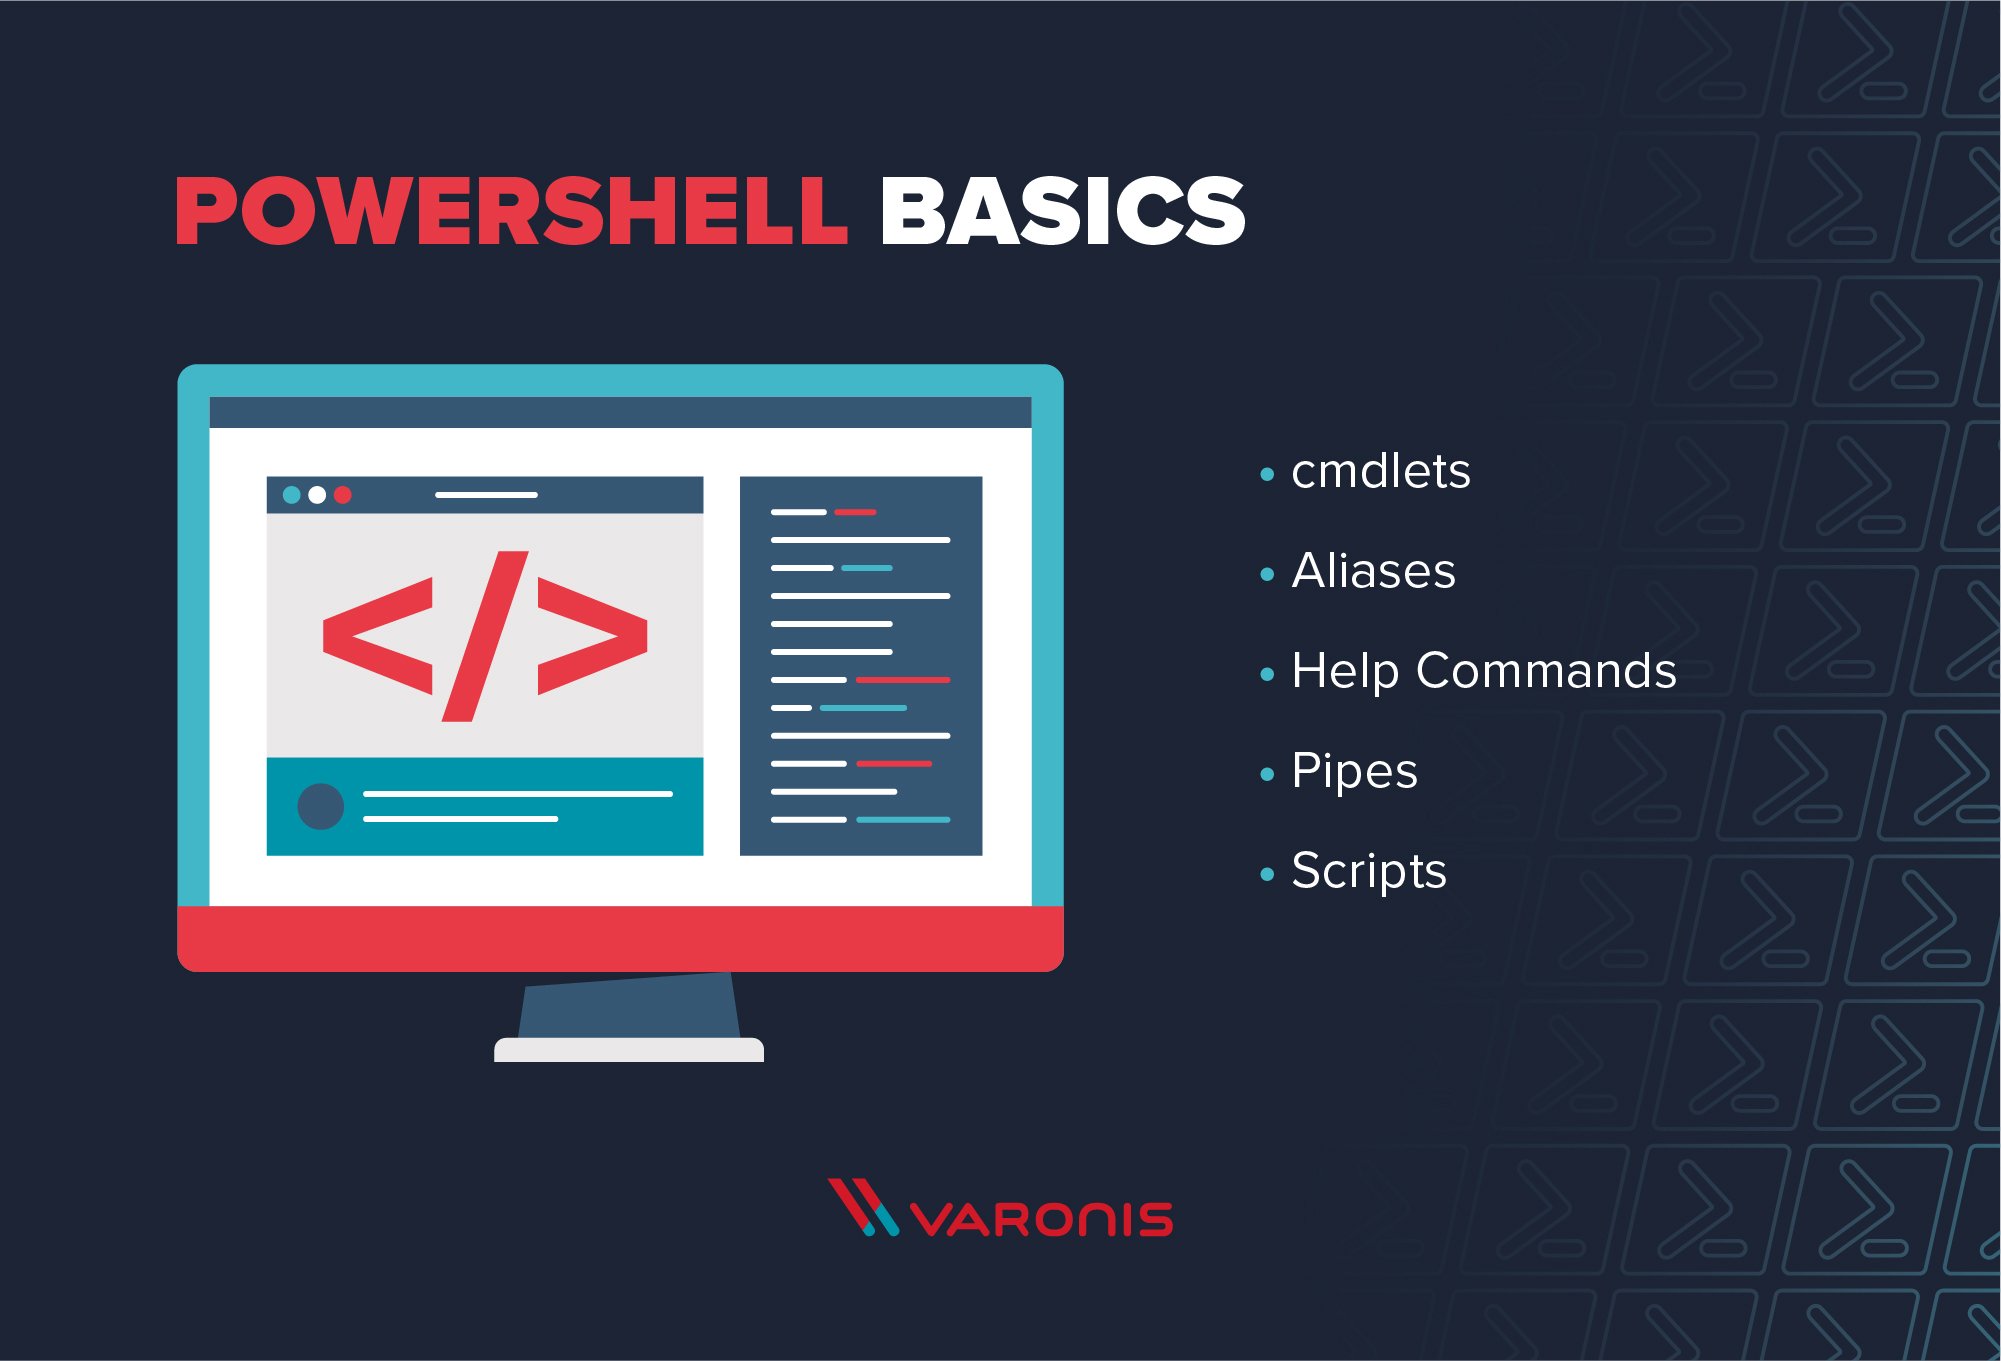 PowerShell scripting for beginners basics image including cmdlts, aliases, help commands, pipes and scripts